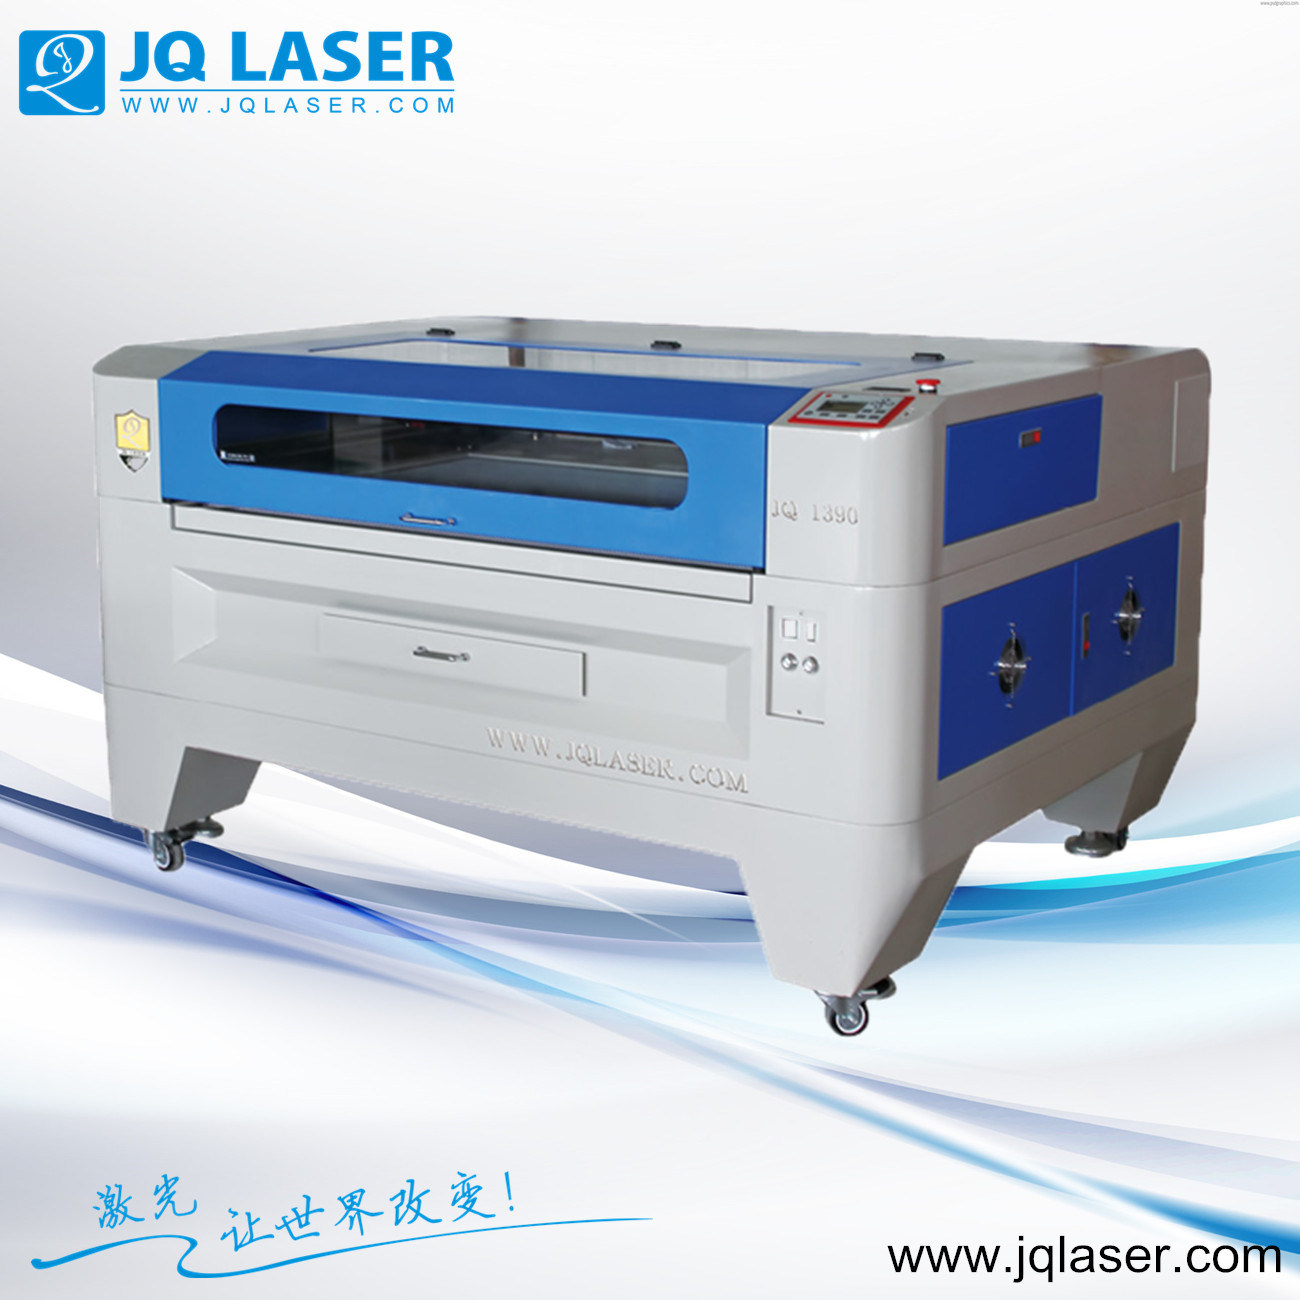 Well Model Beauty Jq1390 Laser Cutting Machine for Nonmental Materials